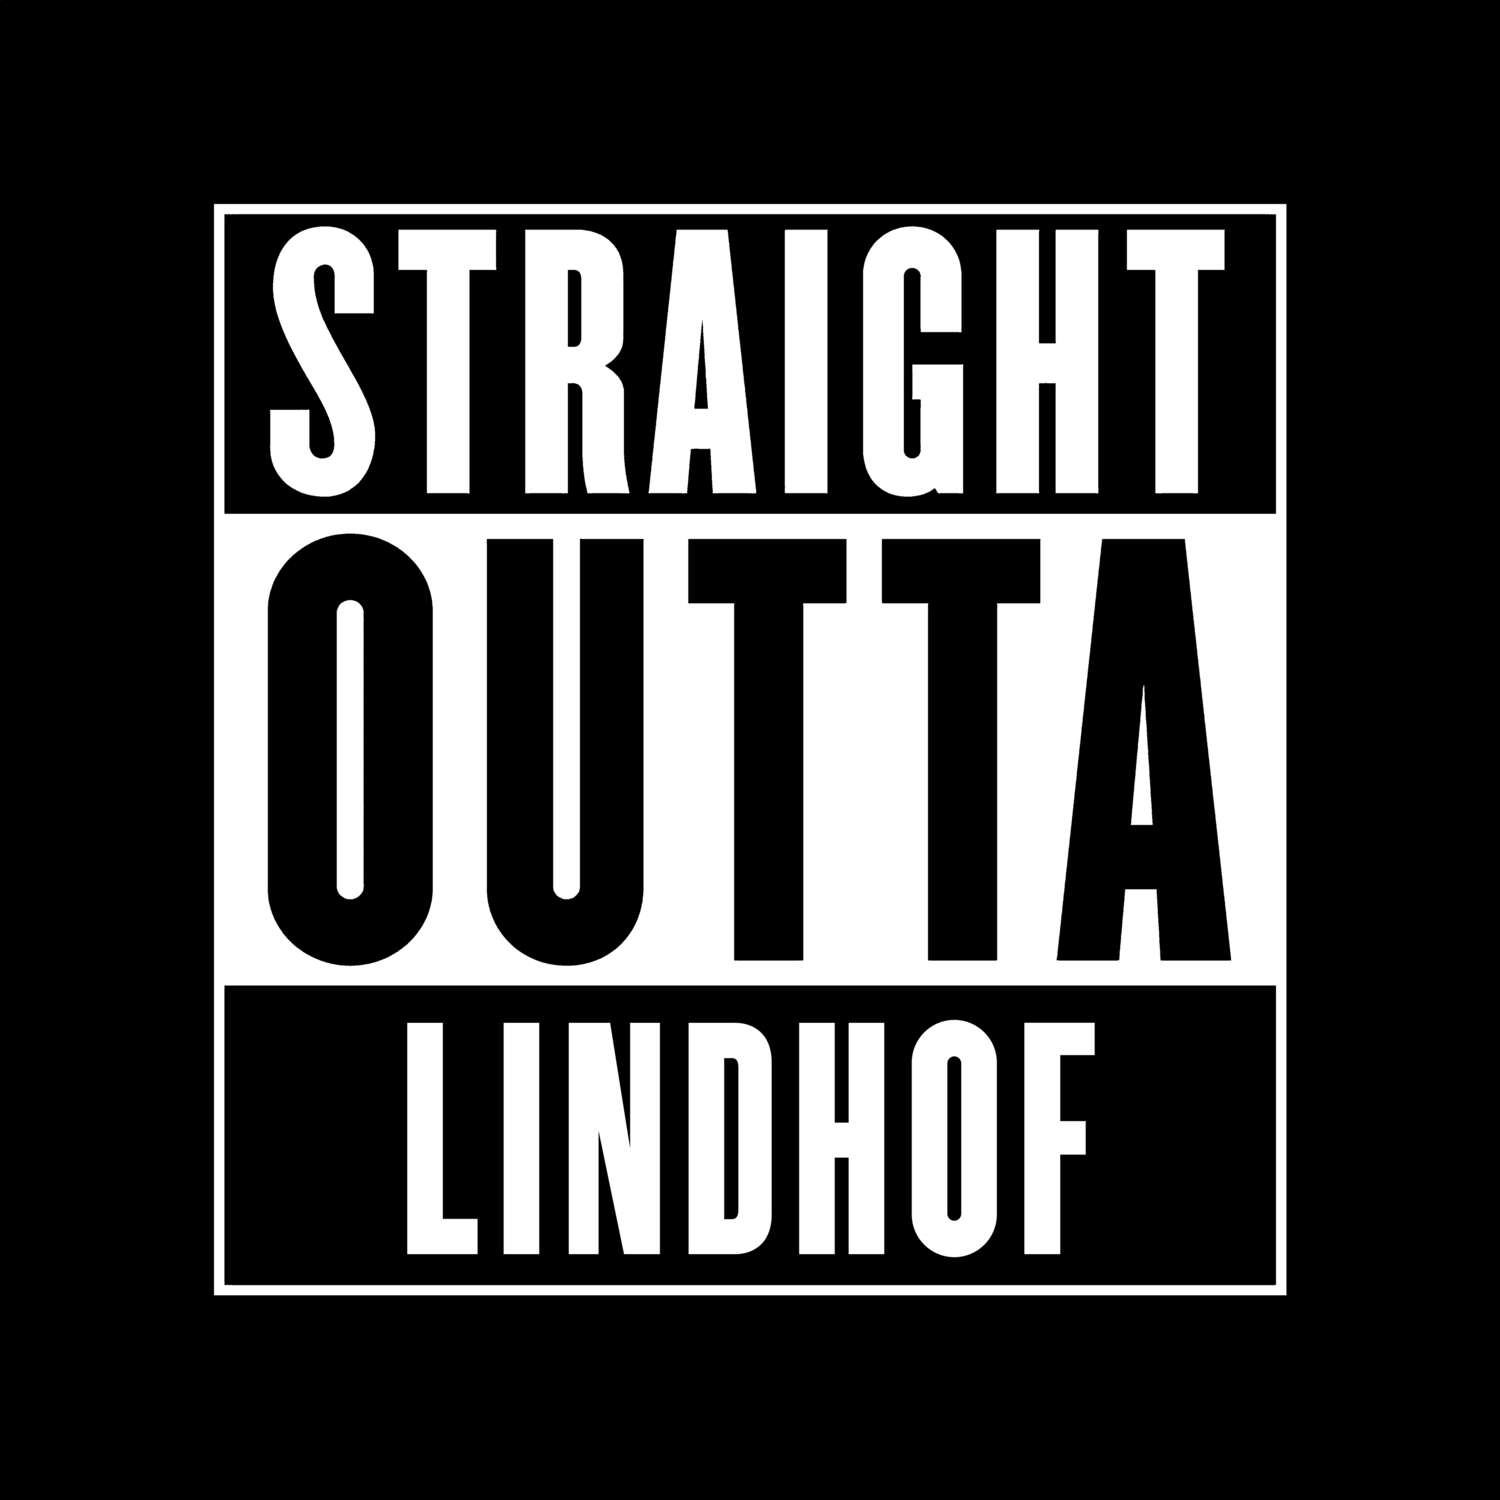 Lindhof T-Shirt »Straight Outta«